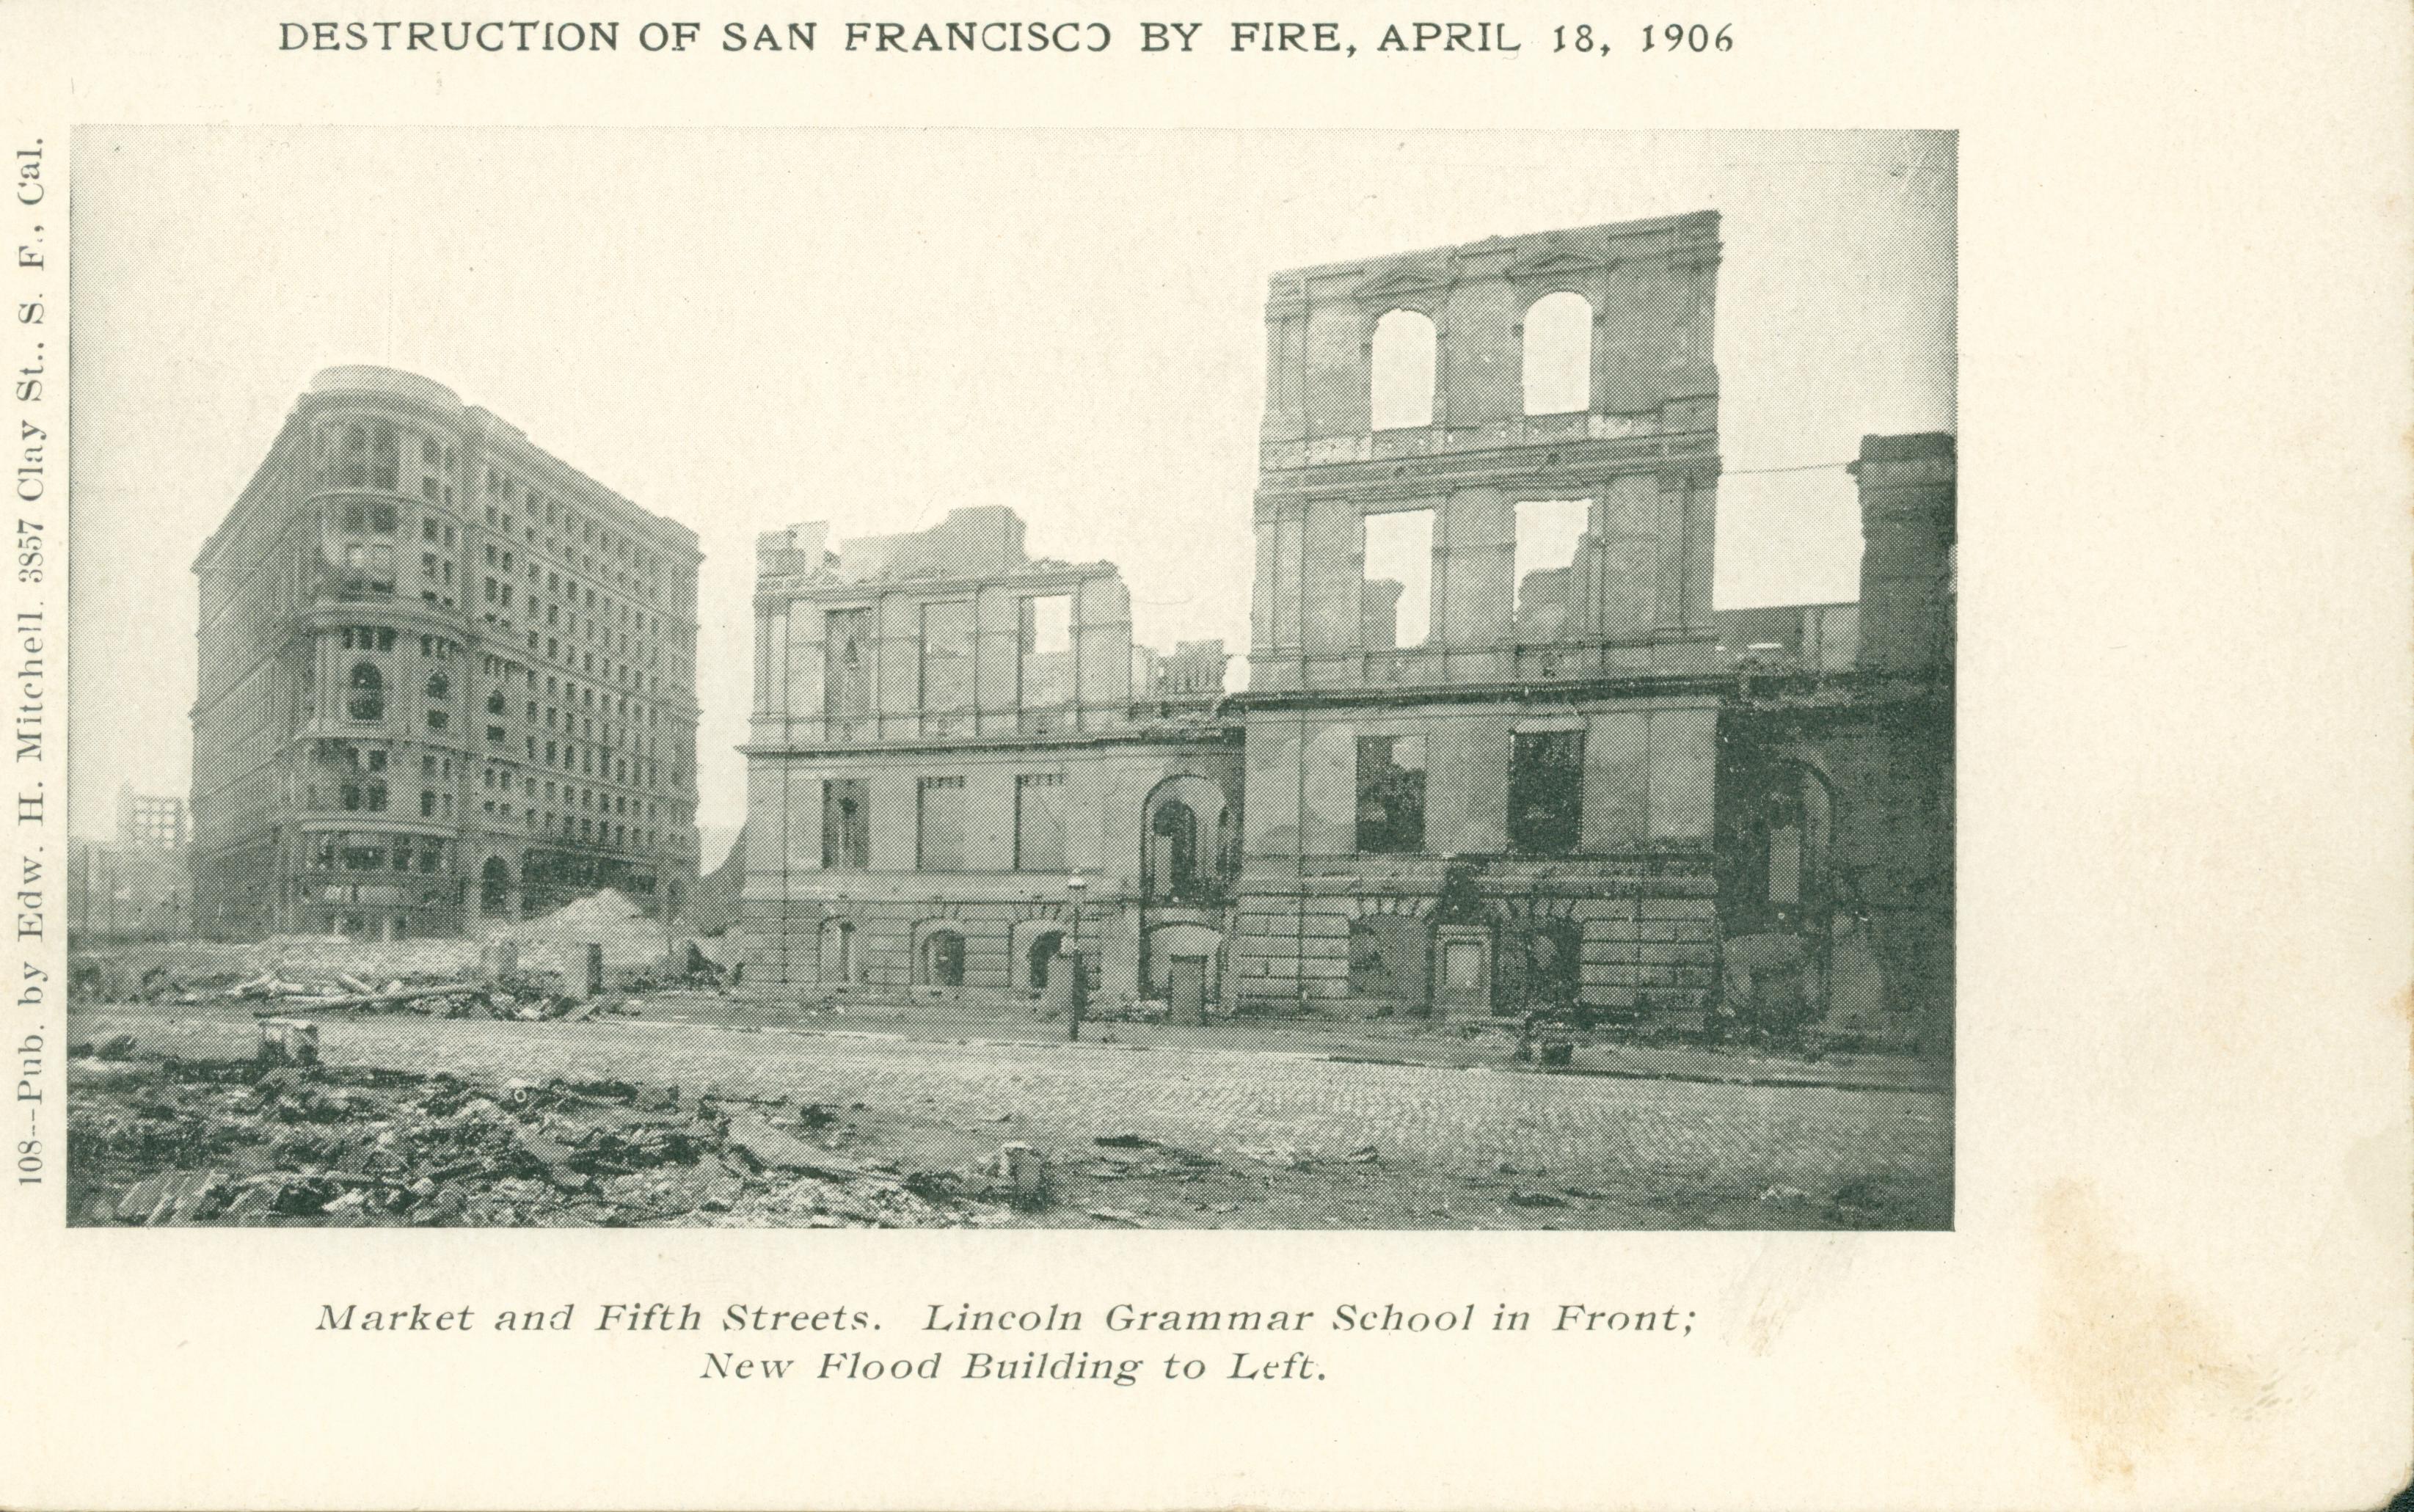 Shows the Flood Building and Lincoln School after the earthquake